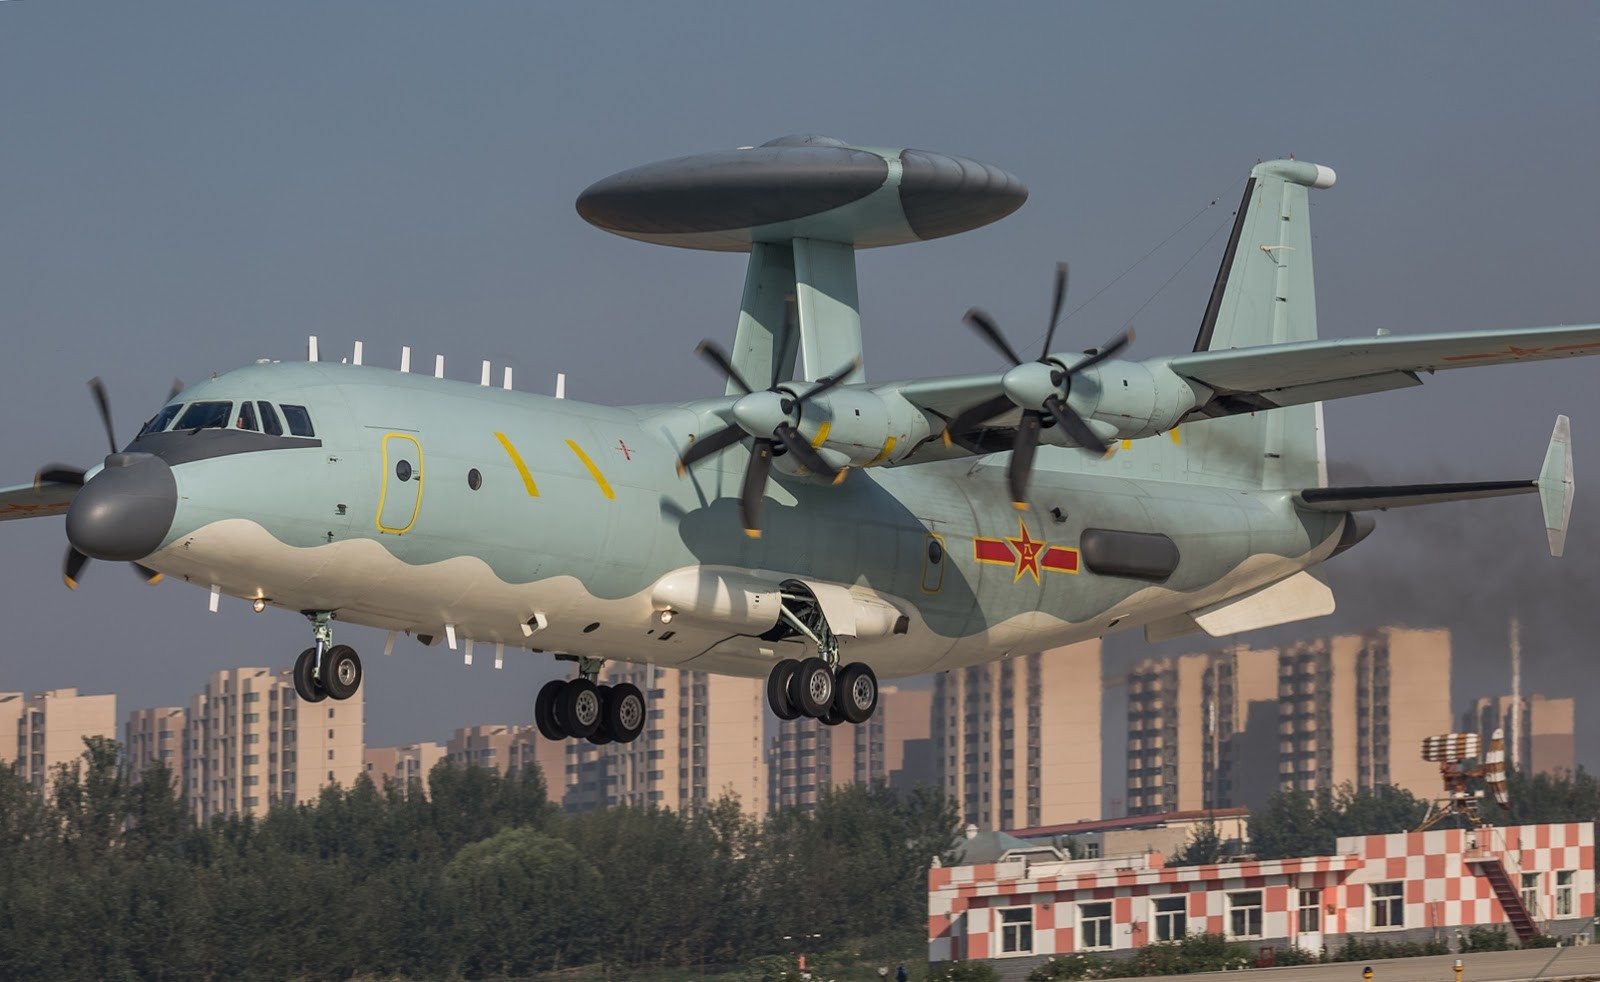 https://www.defencetalk.com/wp-content/uploads/2016/02/Chinese-KJ-500-Airborne-Early-Warning-and-Control-System-aircraf.jpg